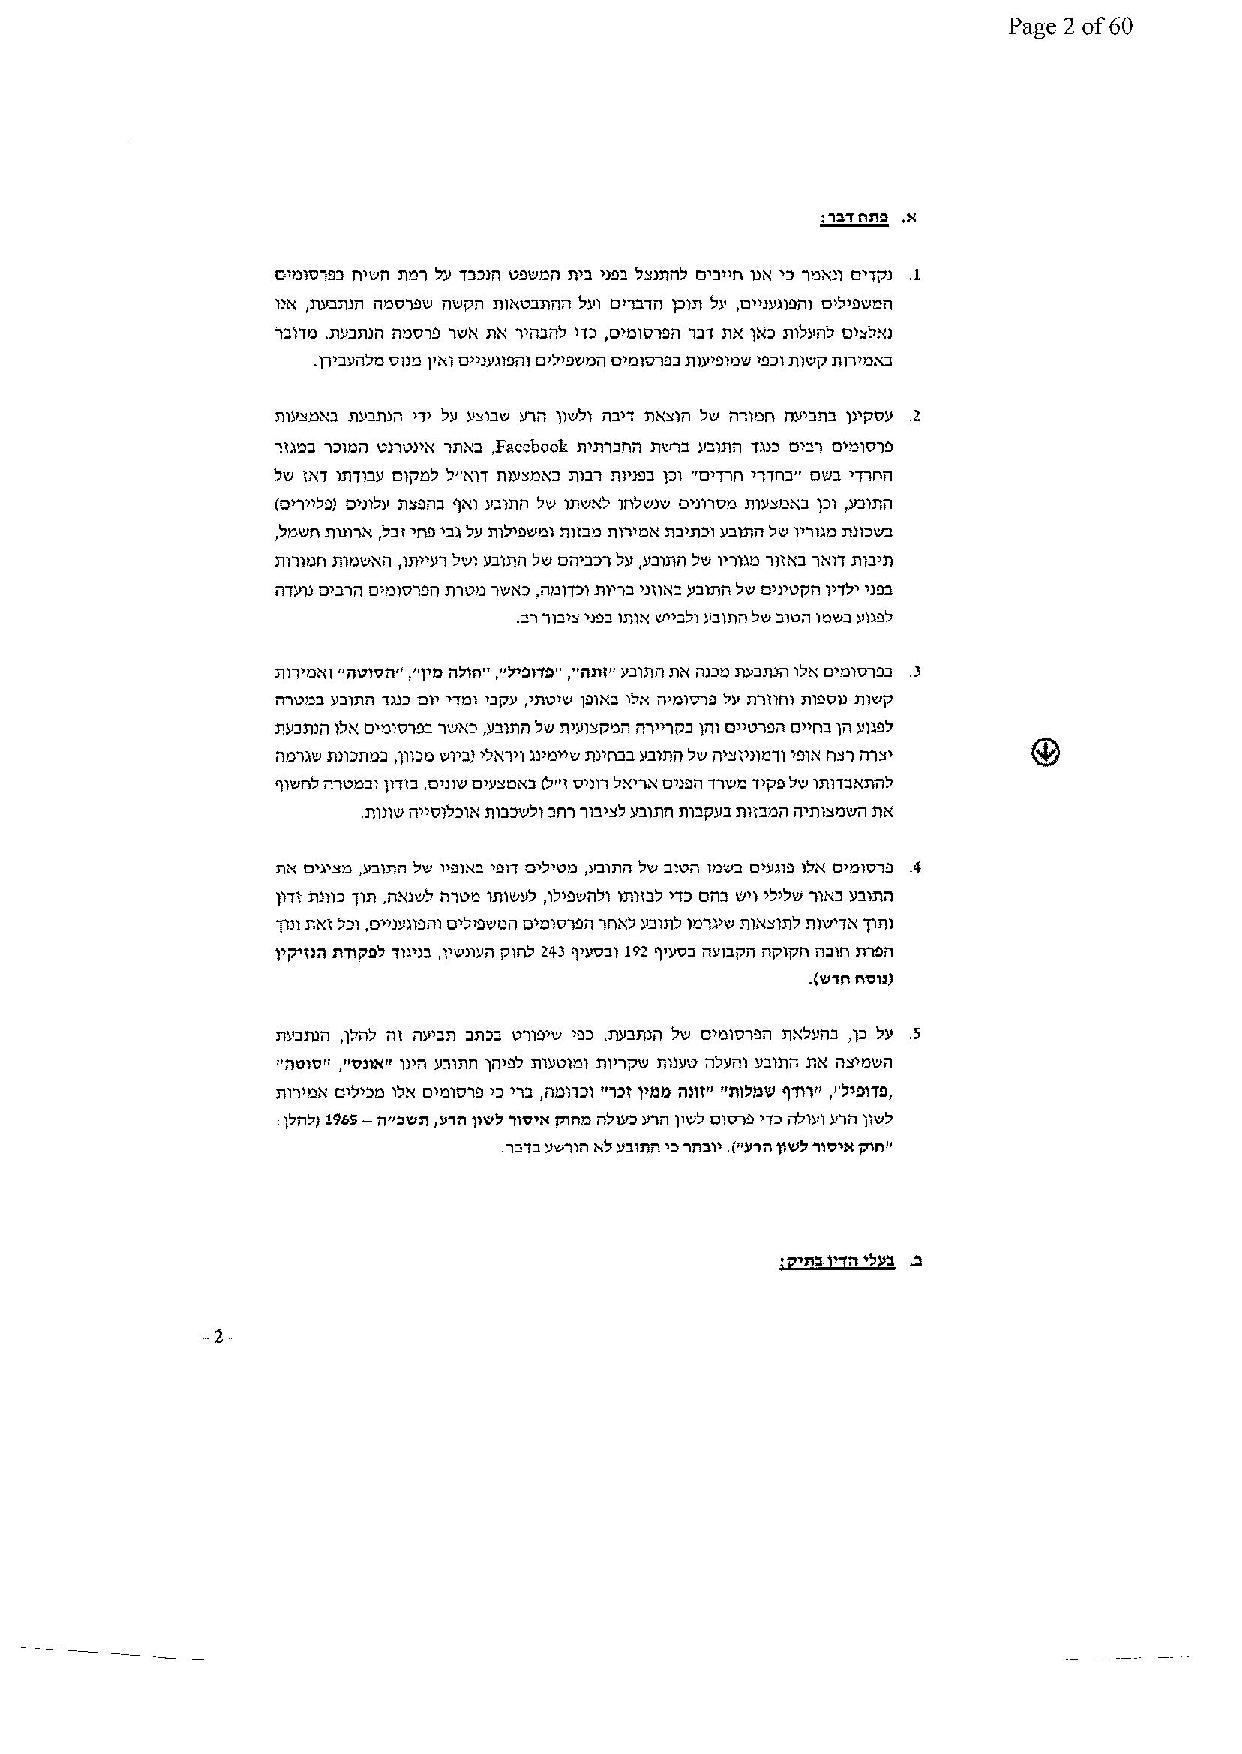 document-page-002